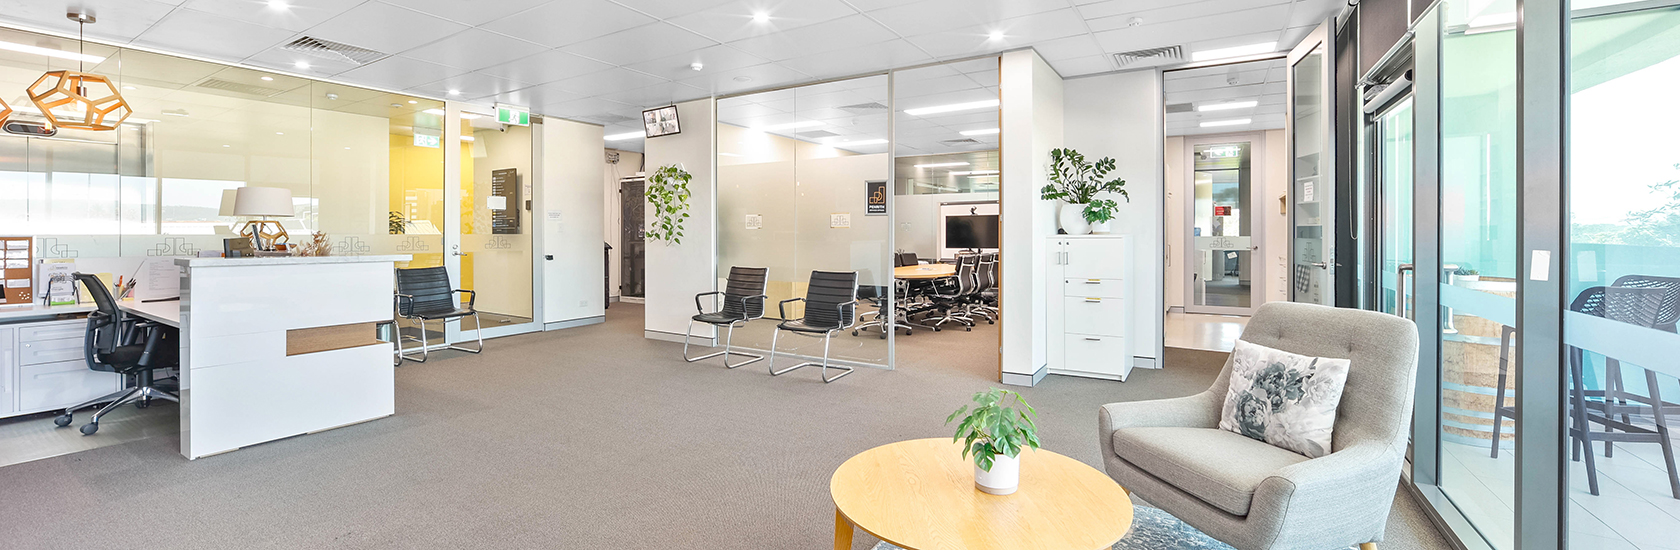 Serviced Offices in Penrith